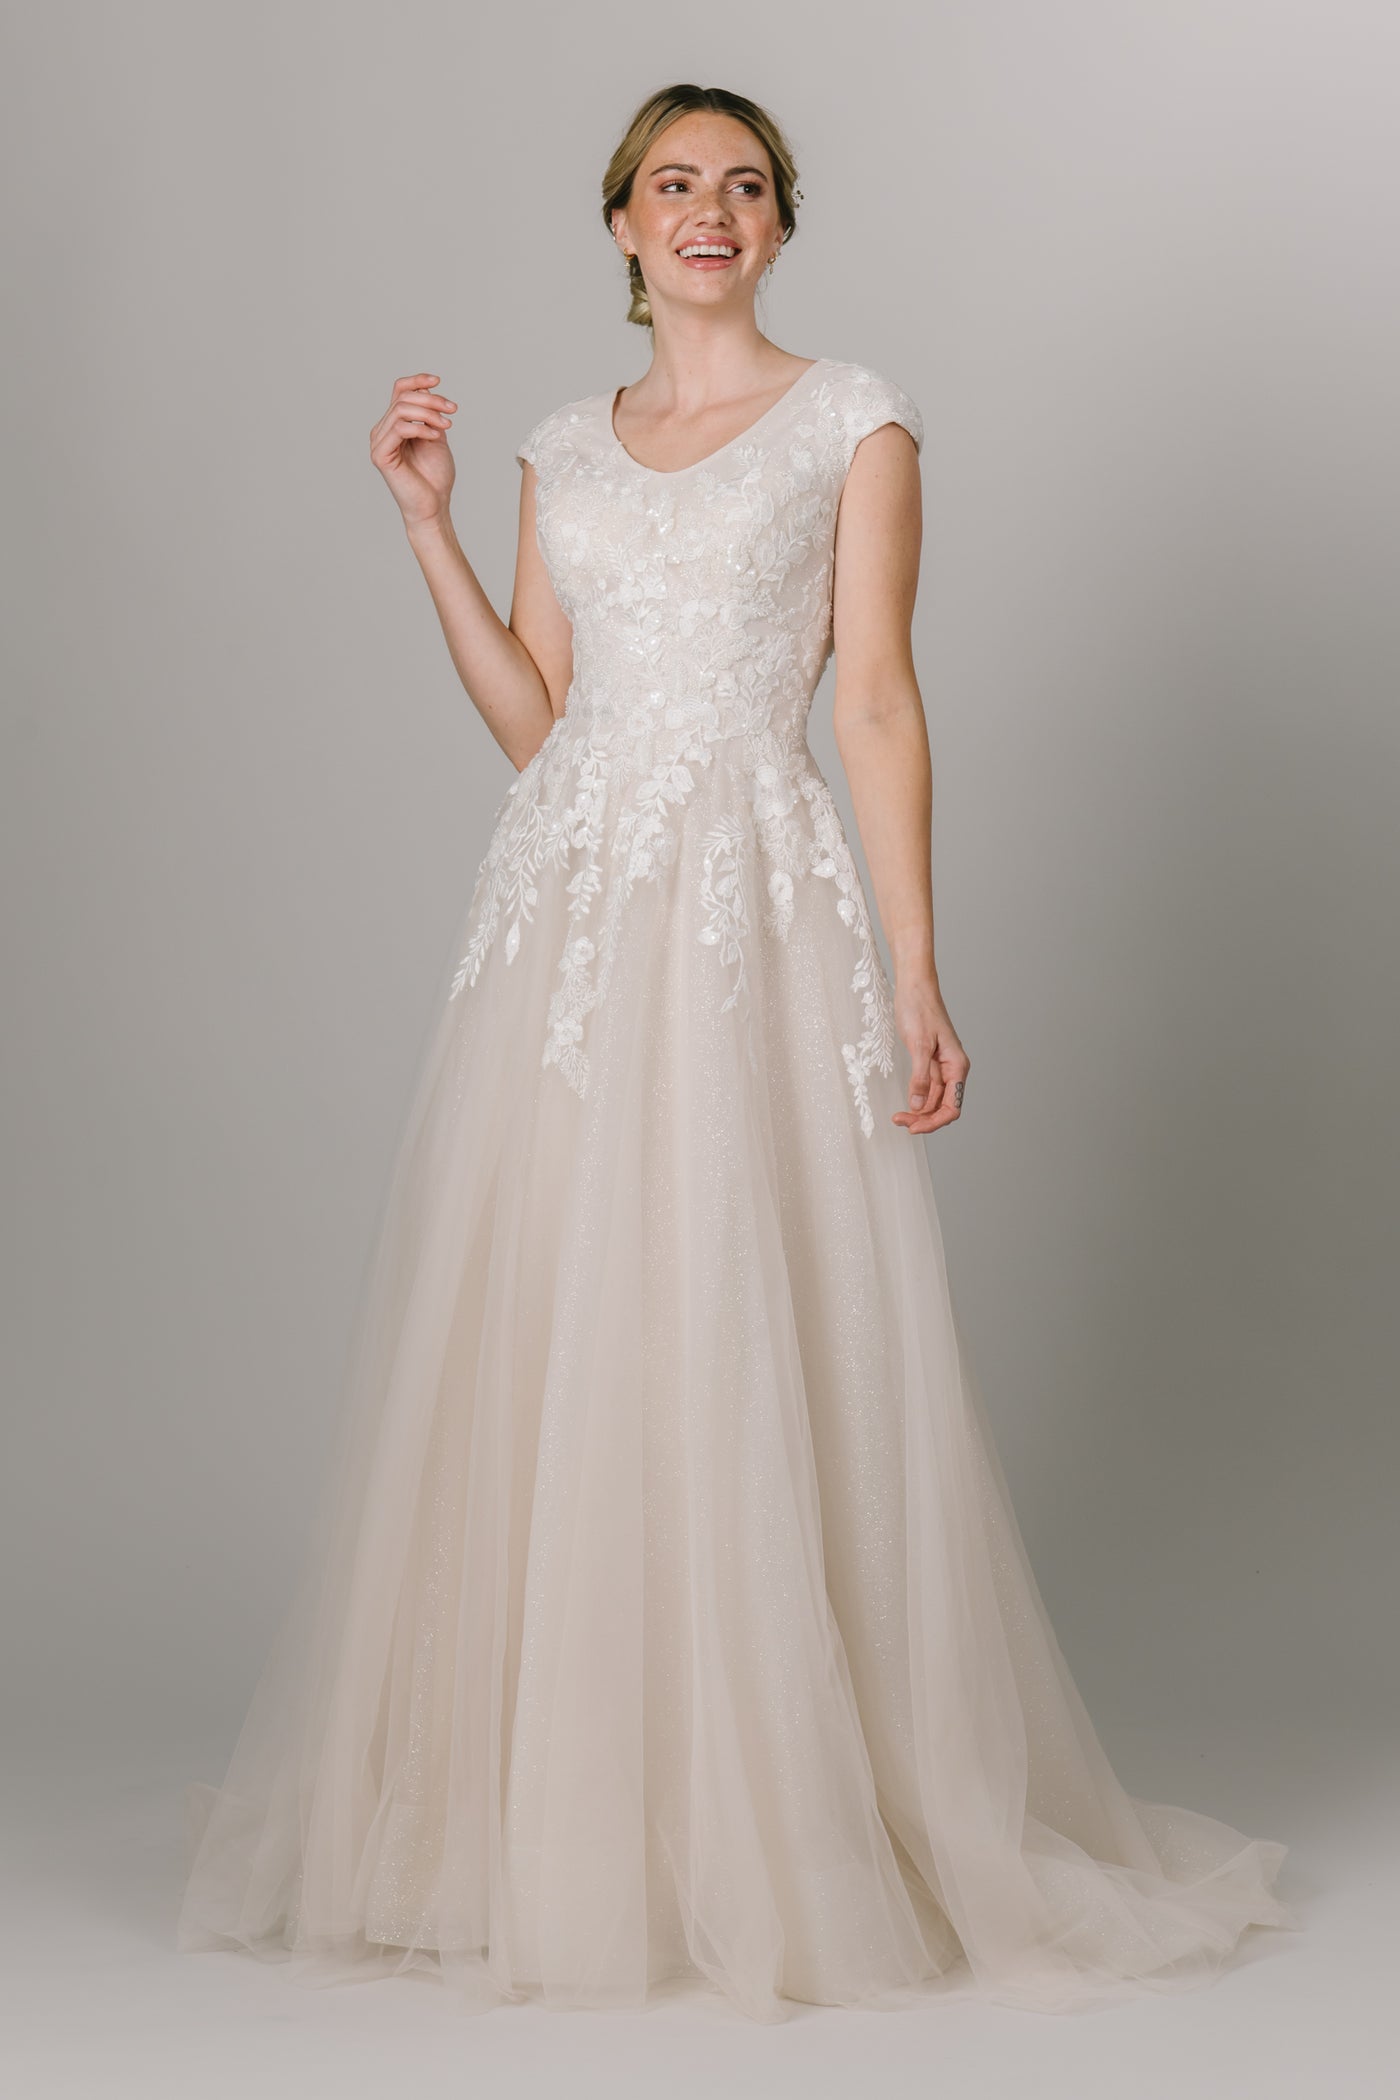 This Modest Wedding Dress features a round neckline, and lace appliques that trickle down the skirt with a glitter lining. - Modest Clothing - Modest Wedding Dresses - Modest Dresses - LatterDayBride